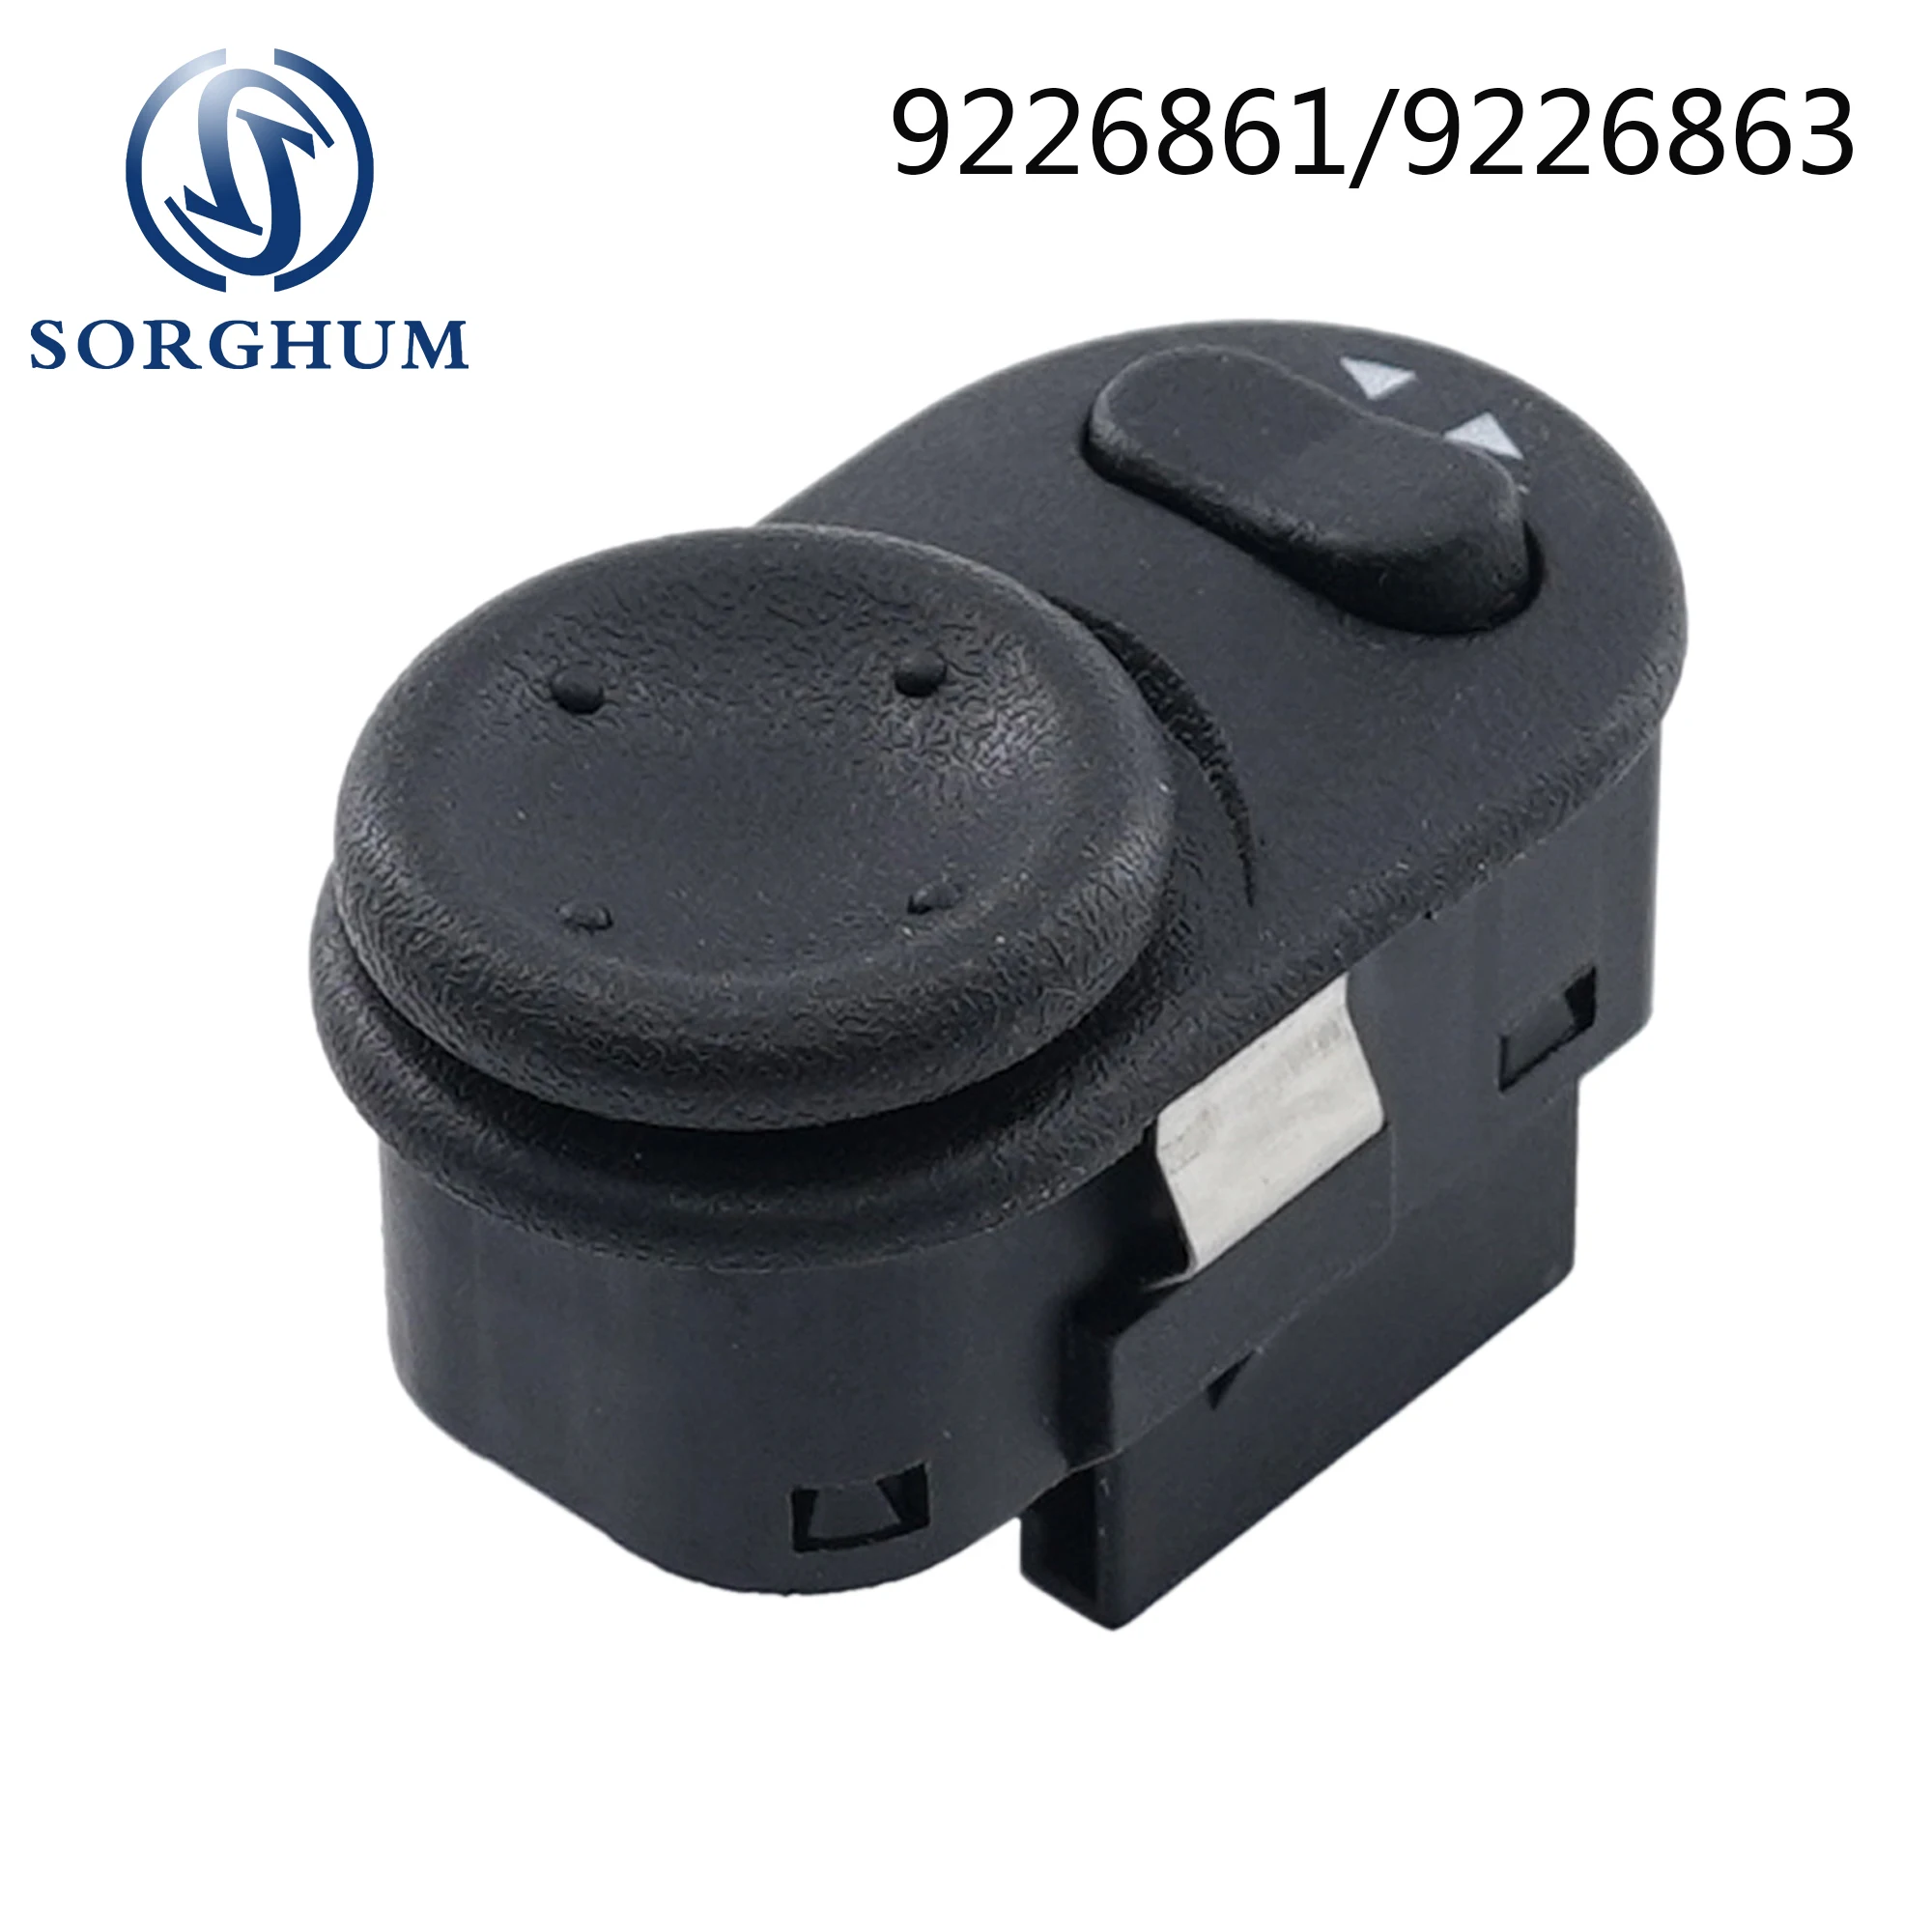 Sorghum Car Outside Rear View Mirror Control Adjuster Switch Knob 9226861 9226863 For Opel Vauxhall Astra-G MK 1998 1999 - 2005 car steering column switch cruise control for opel for astra g 1998 2004 for zafira a 1998 2005 auto parts 90560990 1241348